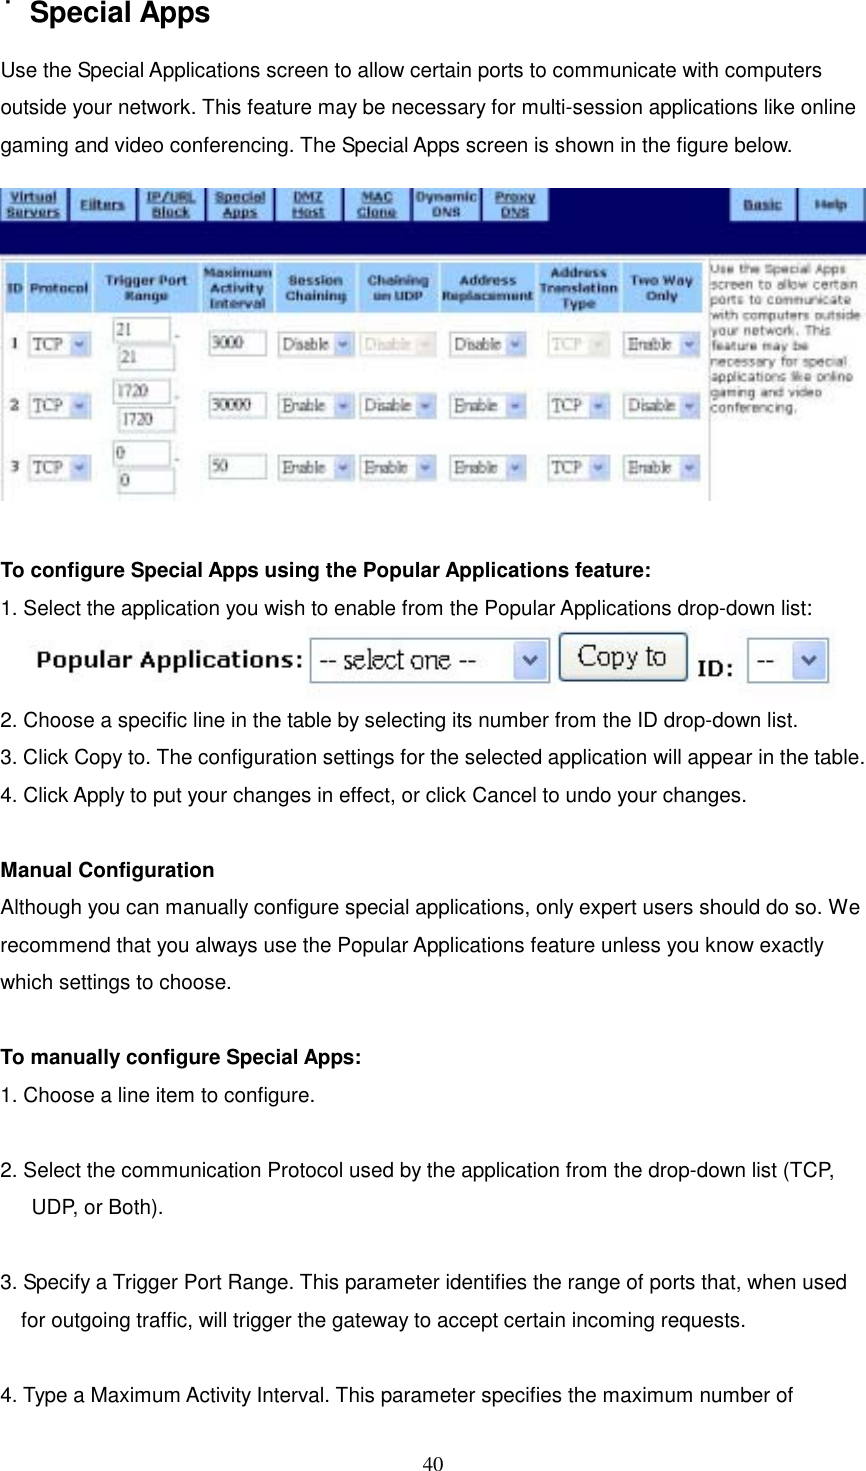  40˙Special Apps Use the Special Applications screen to allow certain ports to communicate with computers outside your network. This feature may be necessary for multi-session applications like online gaming and video conferencing. The Special Apps screen is shown in the figure below.   To configure Special Apps using the Popular Applications feature: 1. Select the application you wish to enable from the Popular Applications drop-down list:   2. Choose a specific line in the table by selecting its number from the ID drop-down list. 3. Click Copy to. The configuration settings for the selected application will appear in the table. 4. Click Apply to put your changes in effect, or click Cancel to undo your changes.  Manual Configuration Although you can manually configure special applications, only expert users should do so. We recommend that you always use the Popular Applications feature unless you know exactly which settings to choose.  To manually configure Special Apps: 1. Choose a line item to configure.    2. Select the communication Protocol used by the application from the drop-down list (TCP, UDP, or Both).  3. Specify a Trigger Port Range. This parameter identifies the range of ports that, when used for outgoing traffic, will trigger the gateway to accept certain incoming requests.  4. Type a Maximum Activity Interval. This parameter specifies the maximum number of 